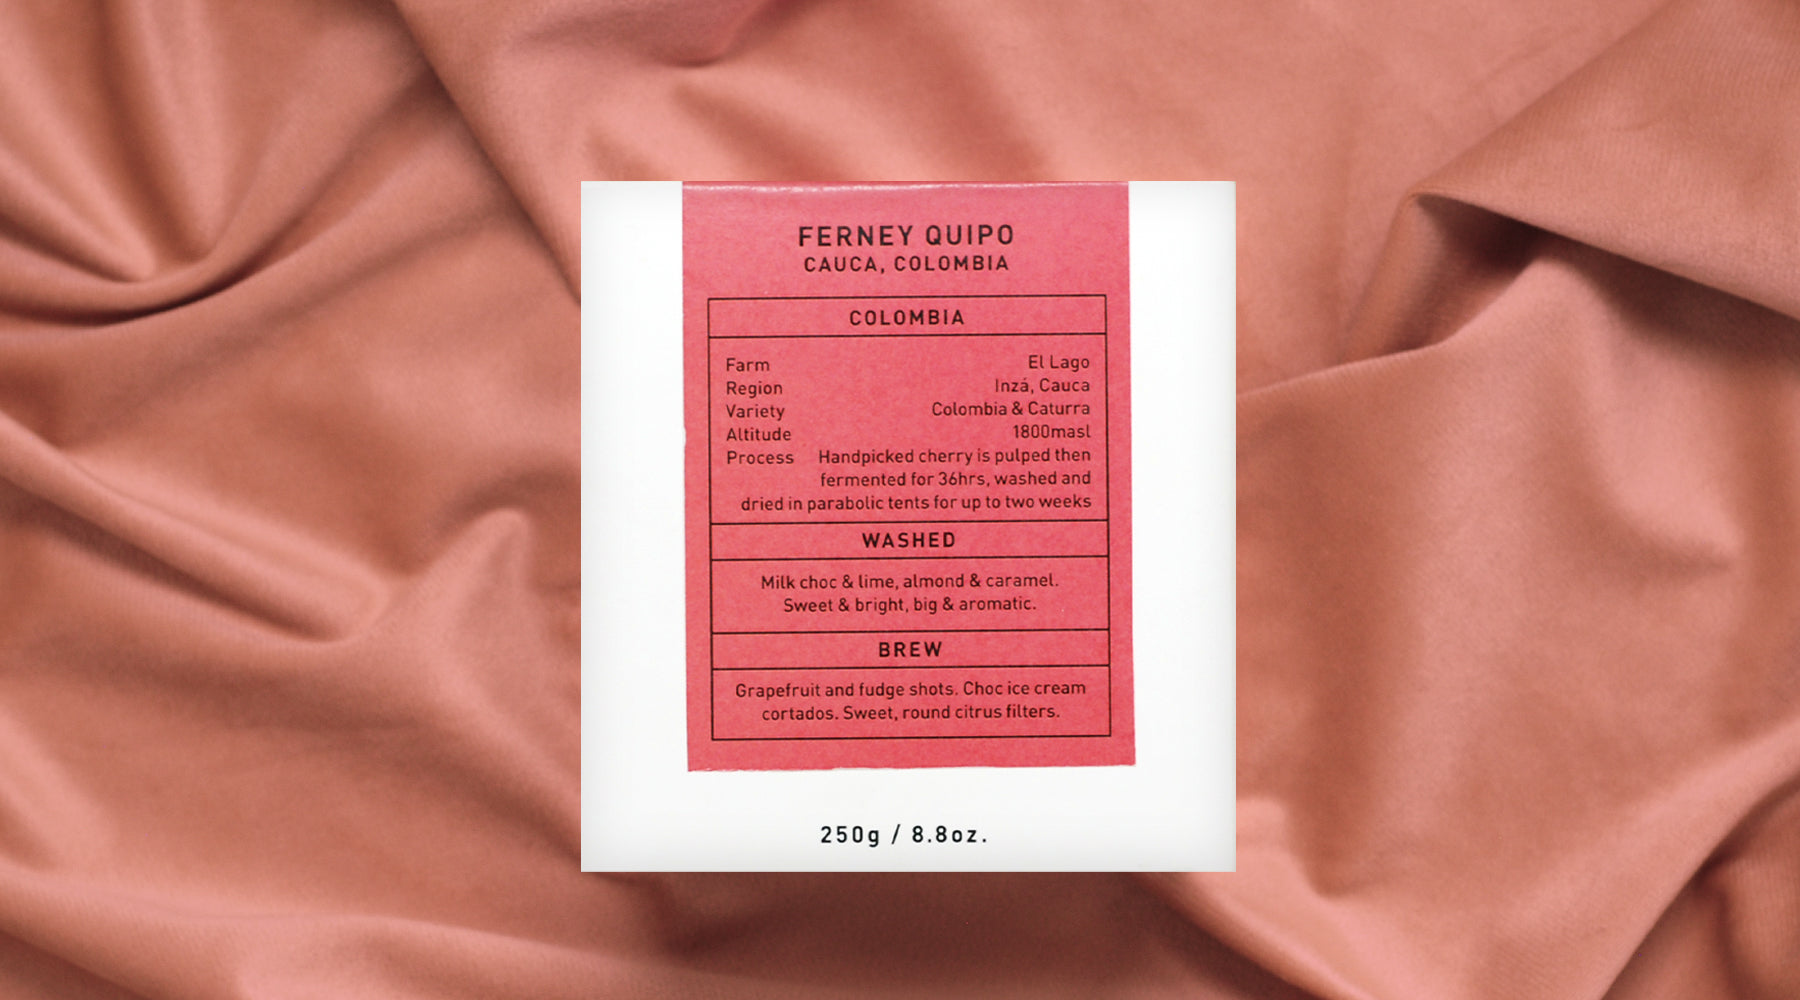 Ferney Quipo, Washed, Cauca